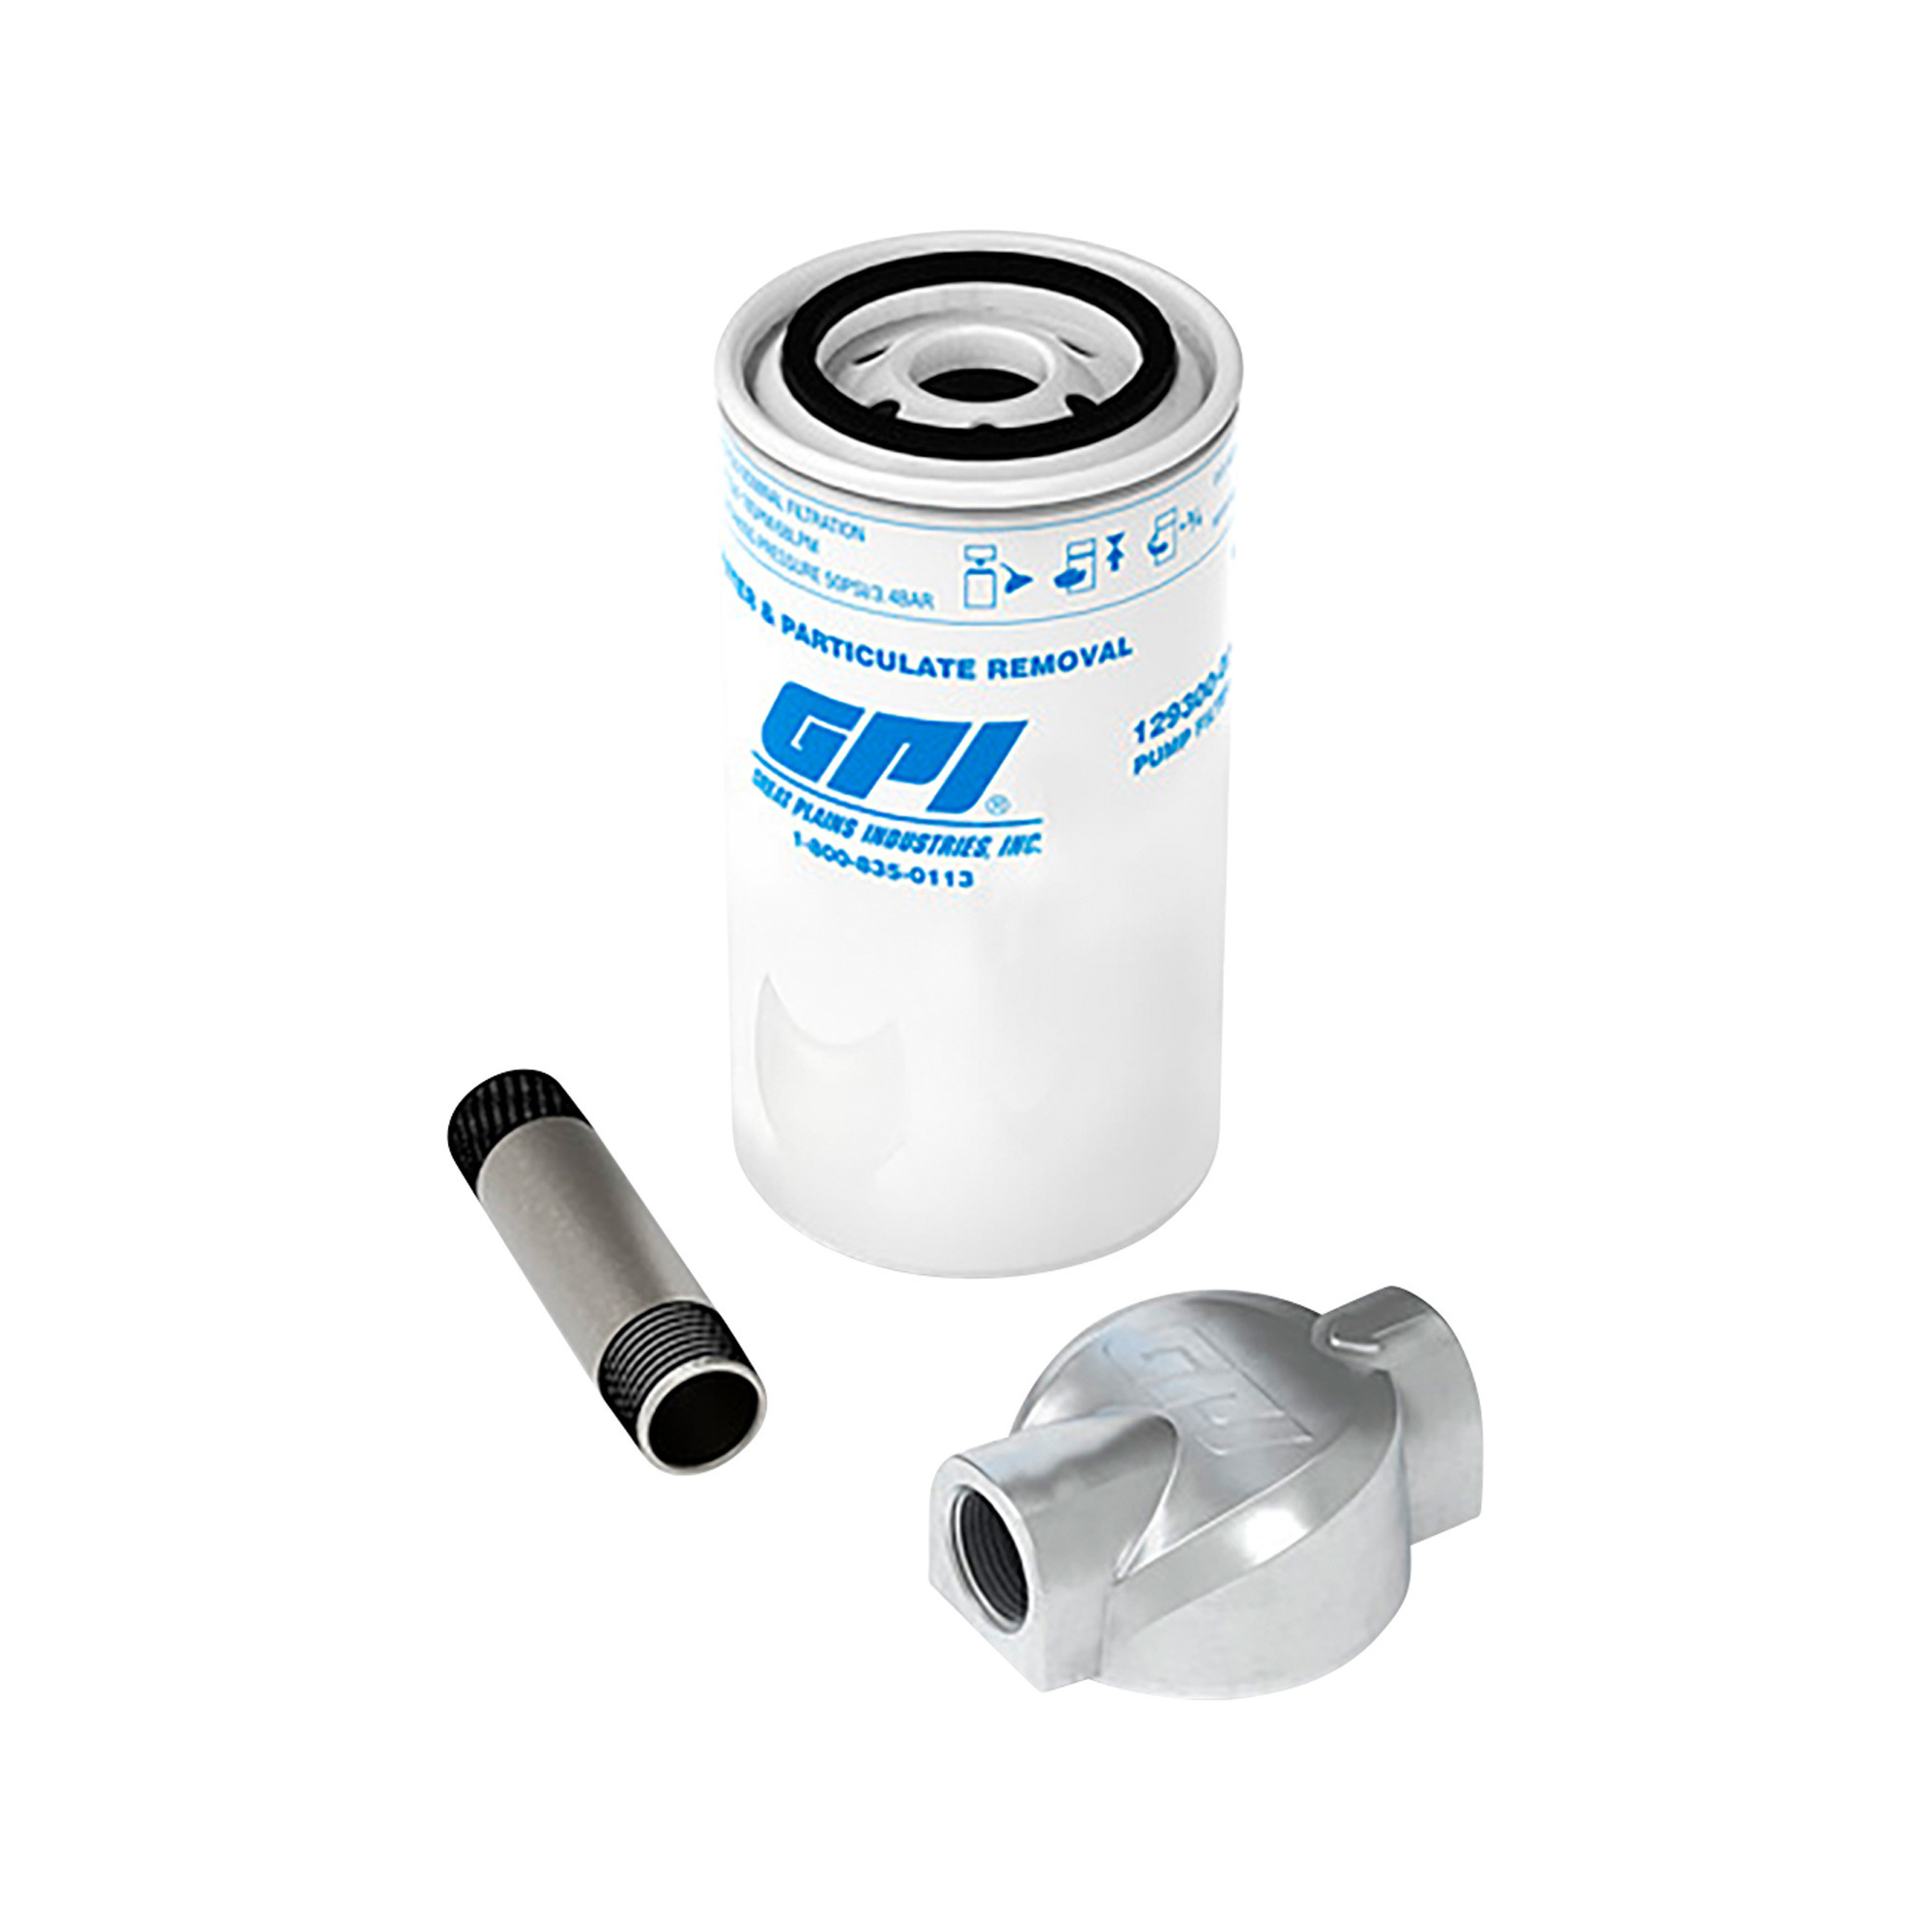 GPI 10 Micron Particulate Filter Kit with 3/4Inch NPT Adapter, 18 GPM